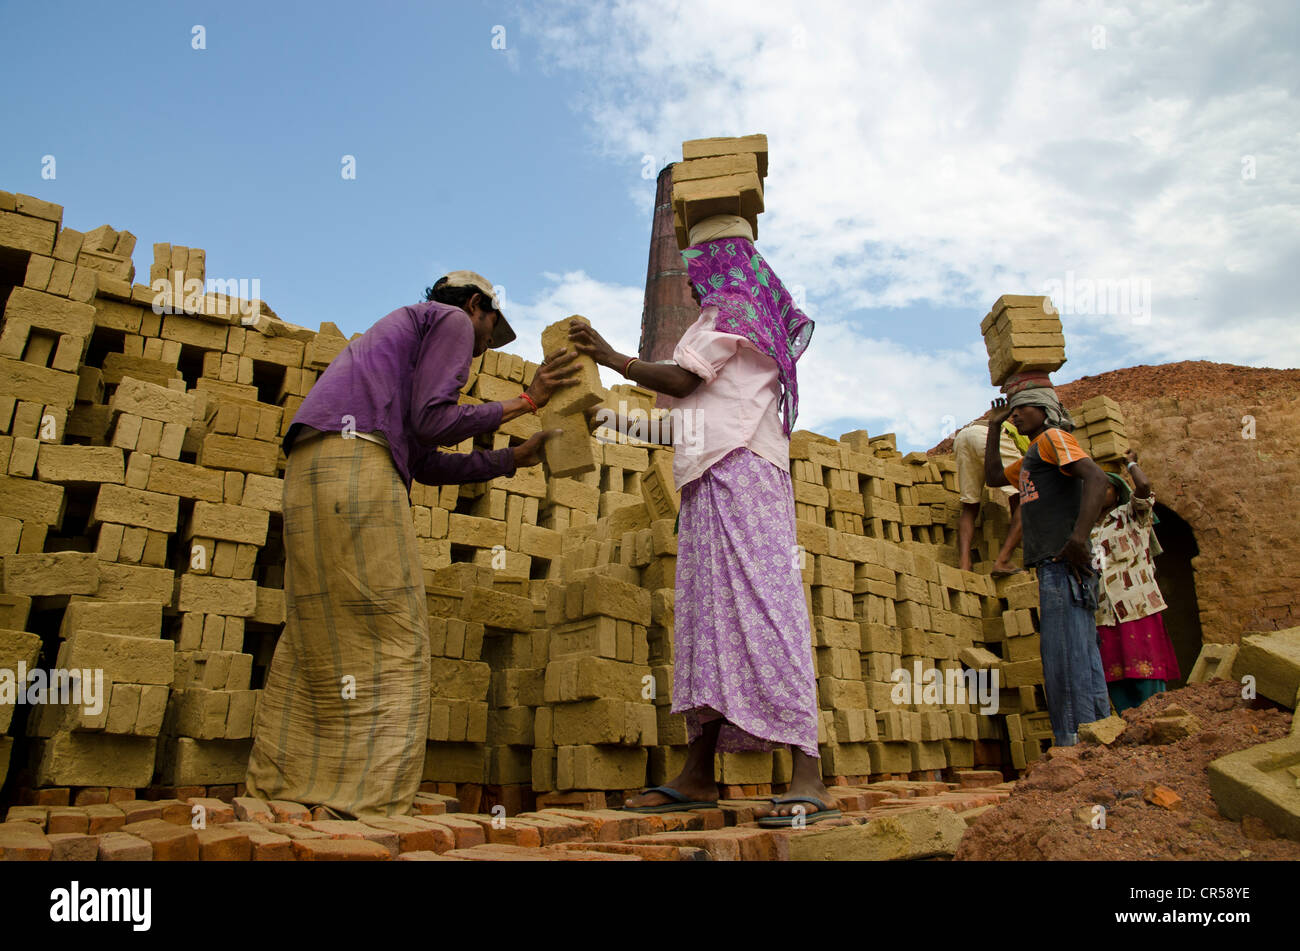 Brick factory where the heavy work is mainly done by children and women, Jorhat area, Assam, India, Asia Stock Photo